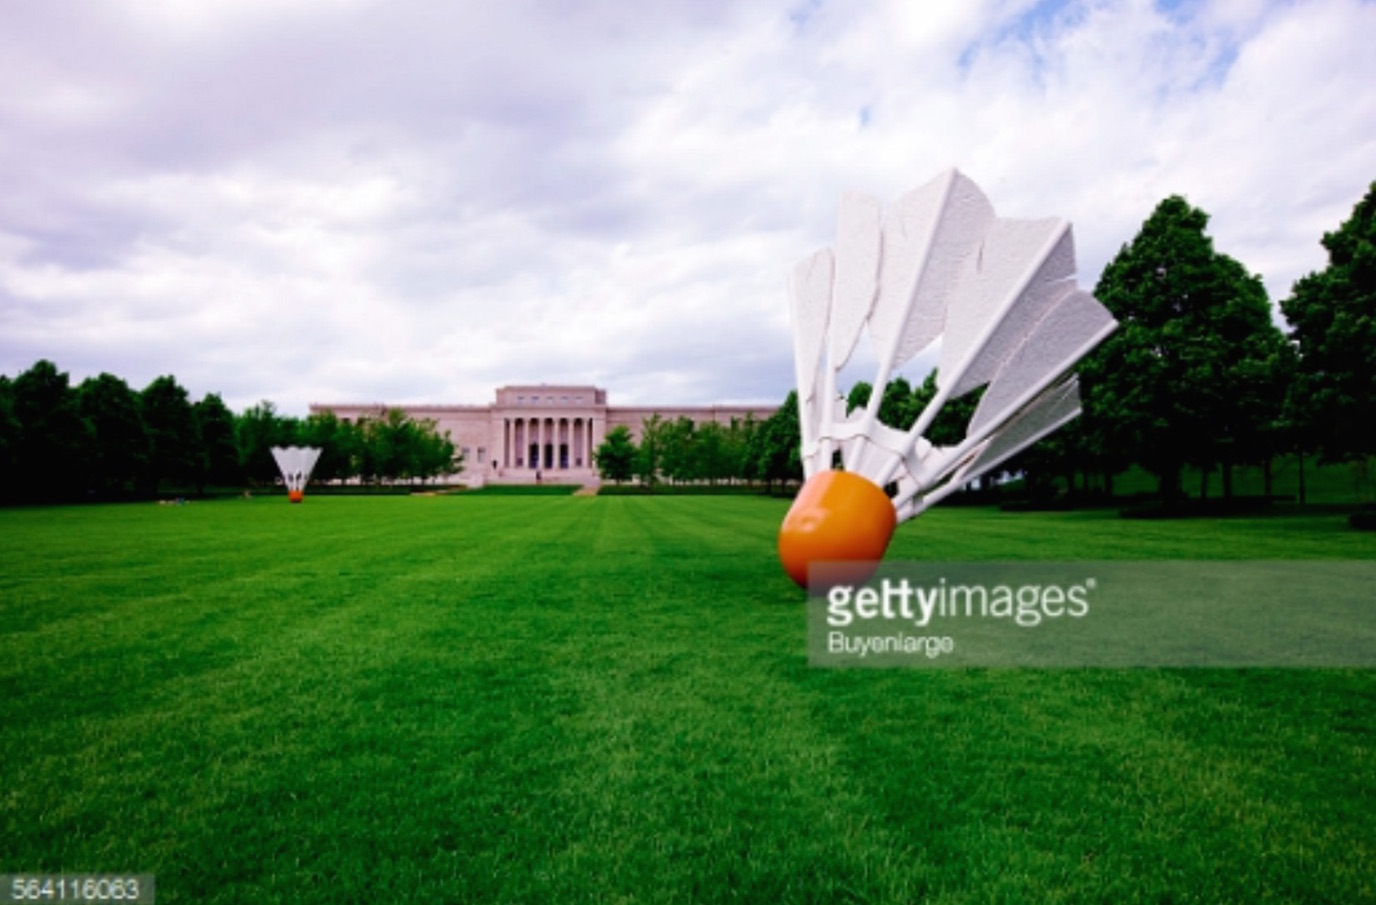 Getty Will Fight Photographer’s $1B Lawsuit For Selling Her Public Domain Images